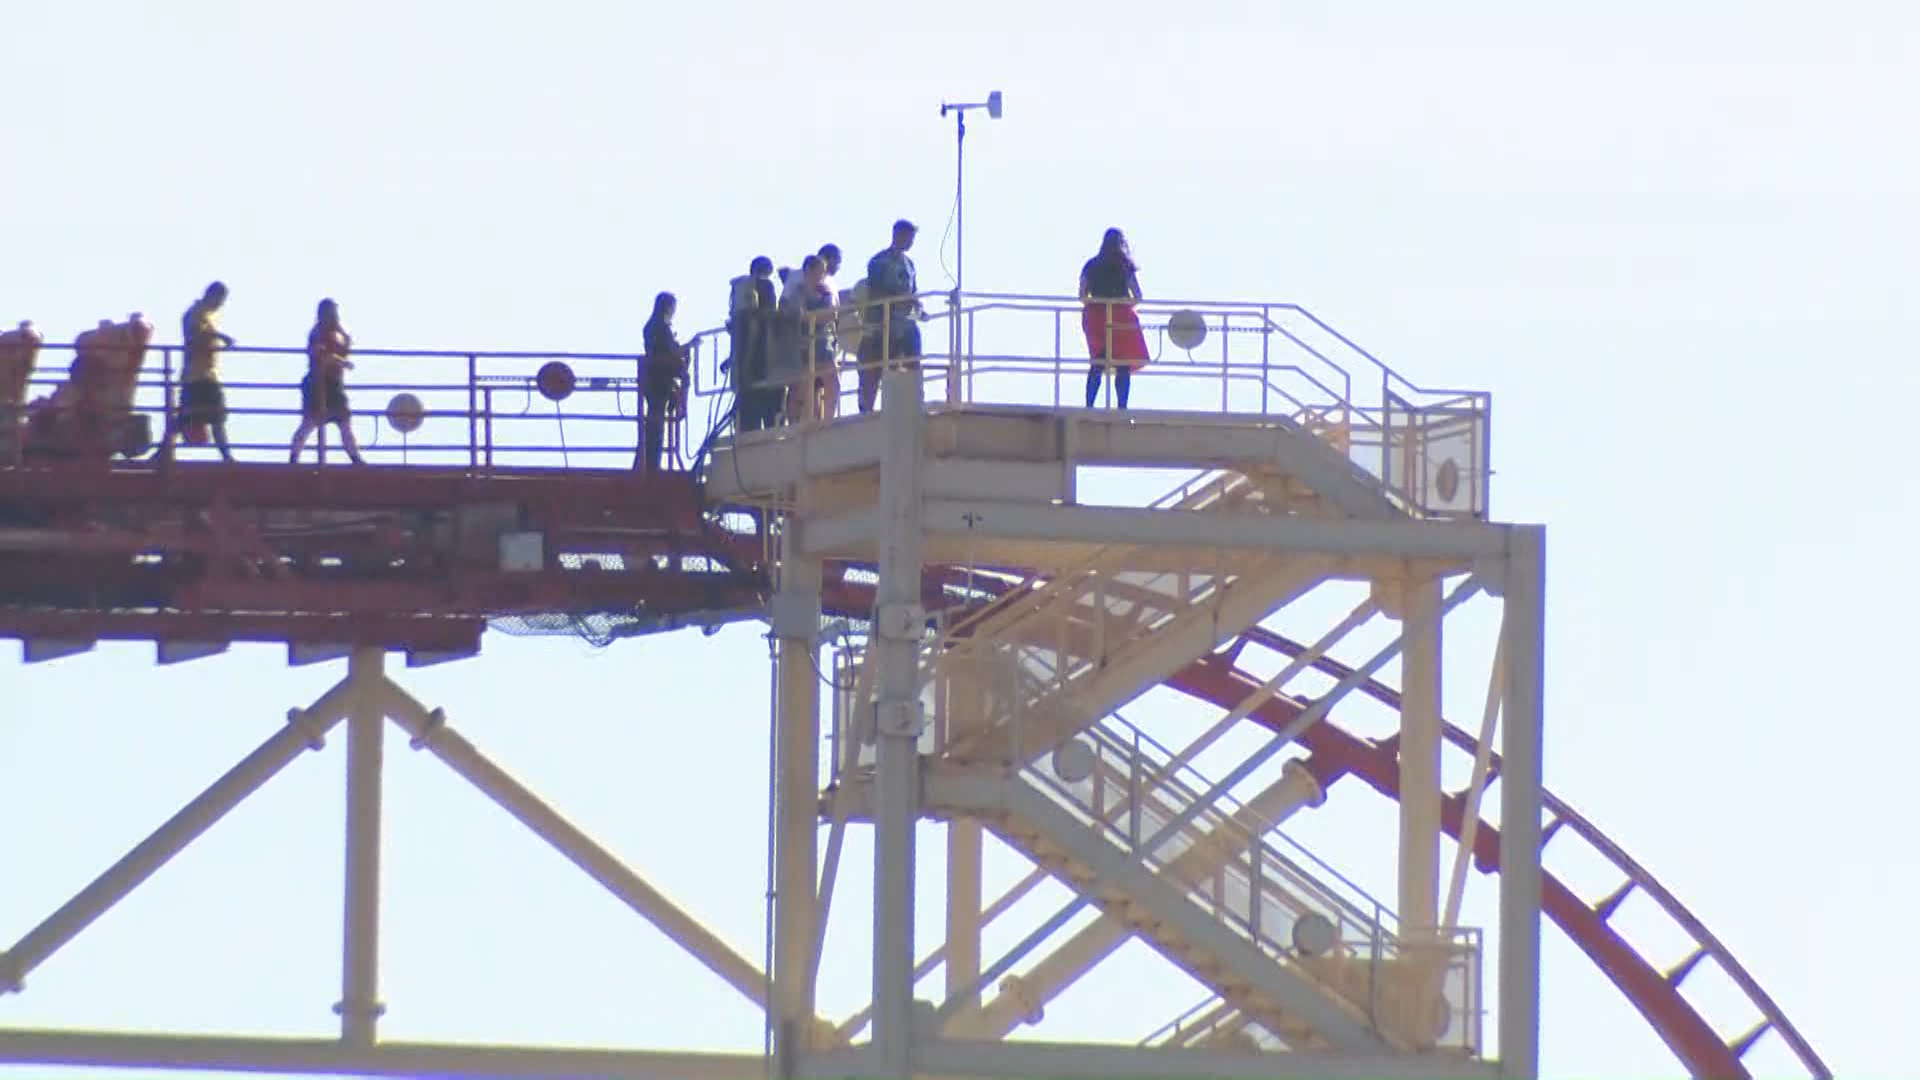 WATCH Riders rescued after Universal Studios roller coaster gets stuck